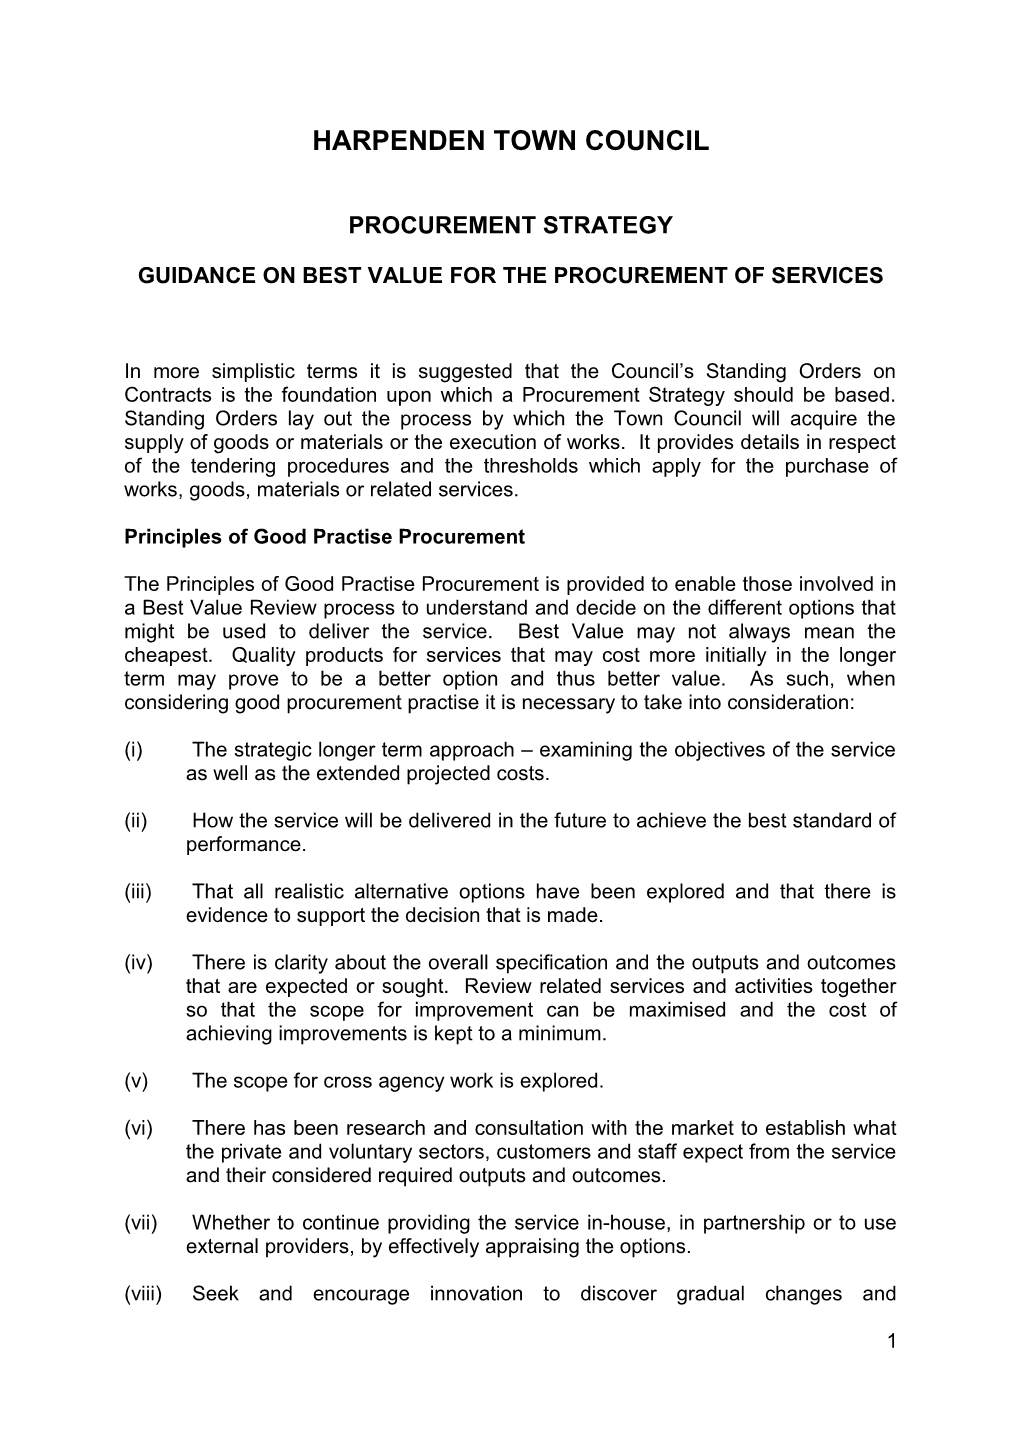 Guidance on Best Value for the Procurement of Services